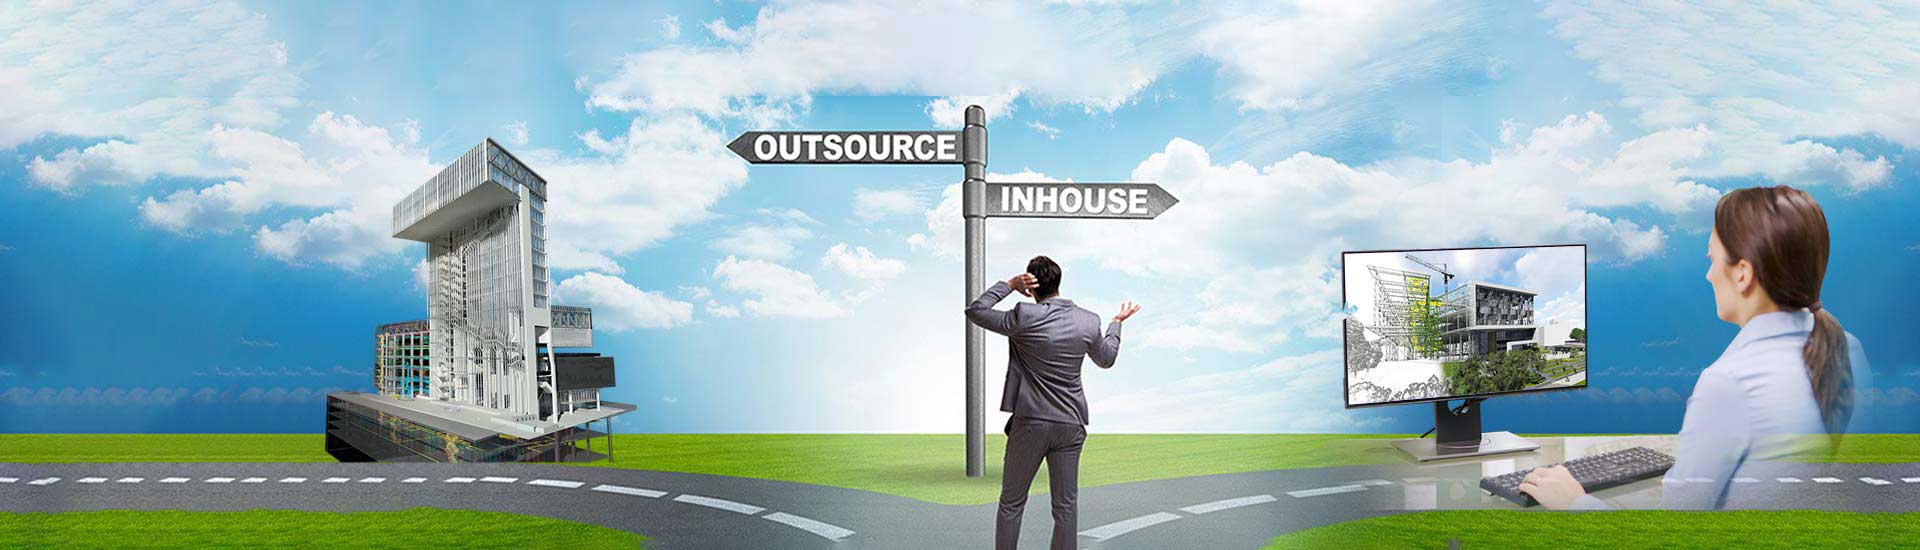 BIM Services: Outsource Vs In-house